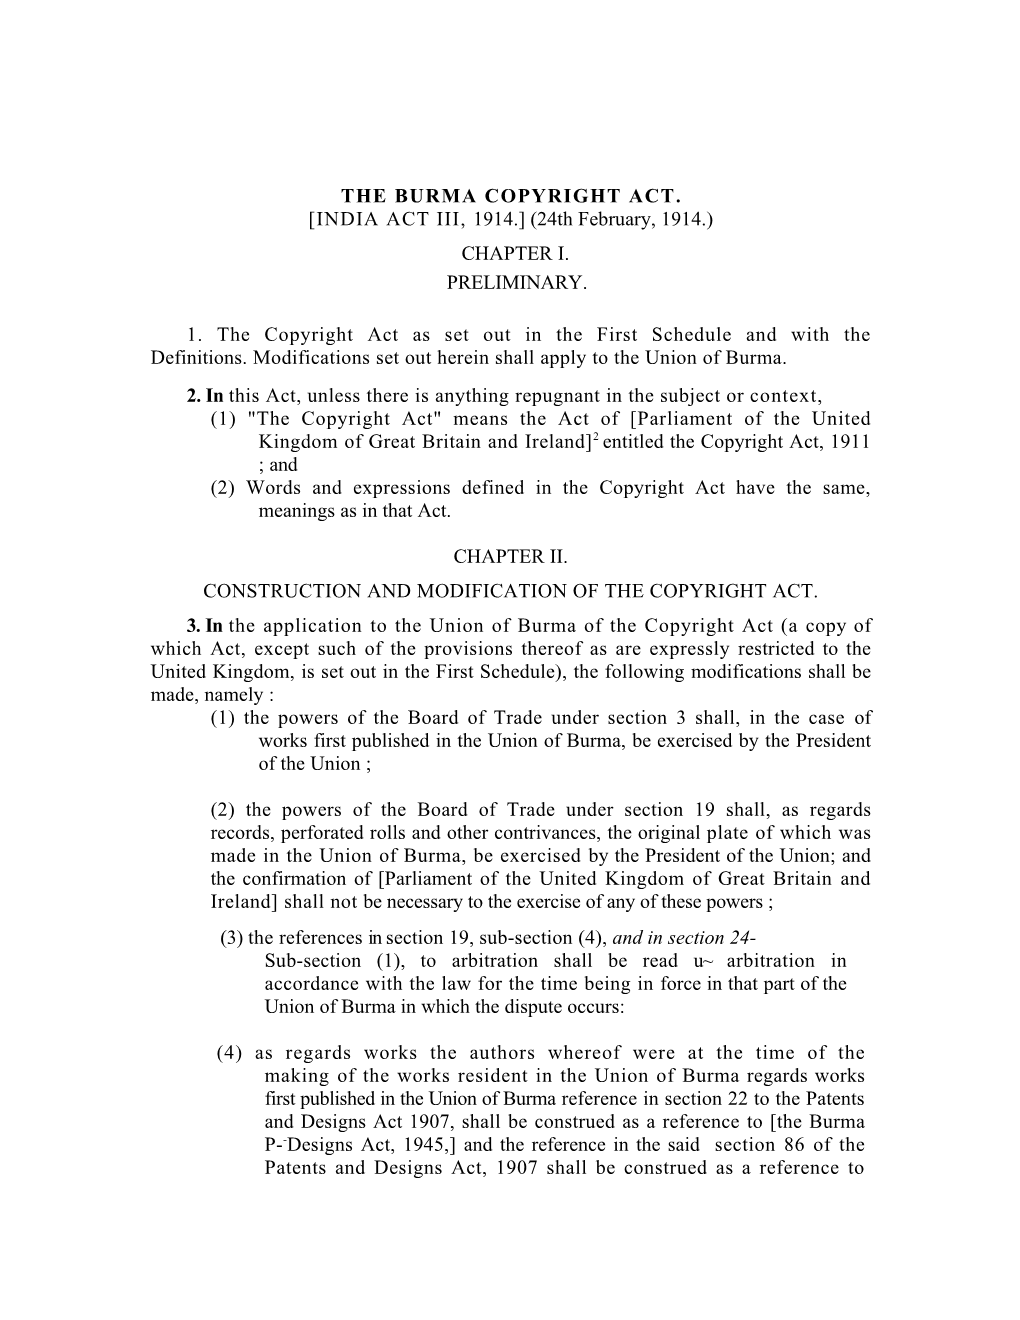 Copyright Act, 1911 ; and (2) Words and Expressions Defined in the Copyright Act Have the Same, Meanings As in That Act